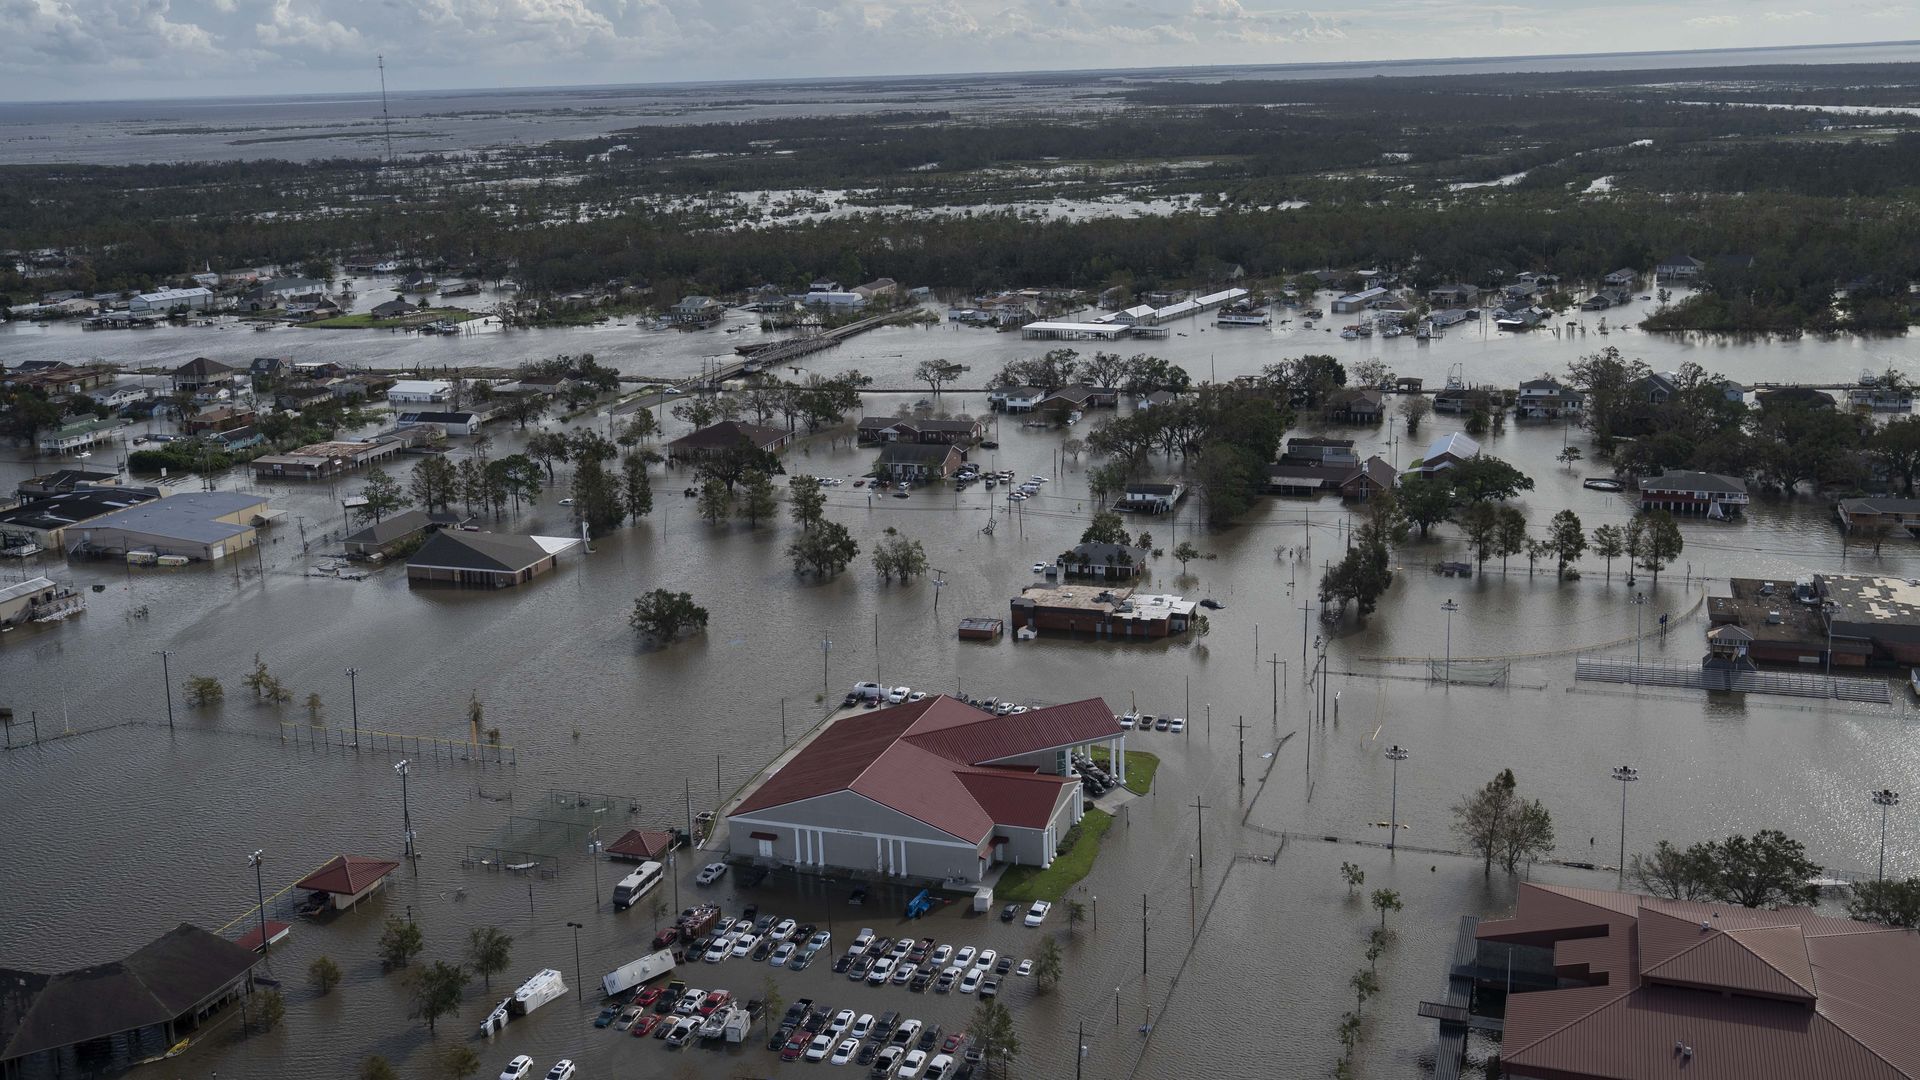 Homes, cars and streets are overwhelmed by water in Lafitte, Louisiana, after Hurricane Ida.